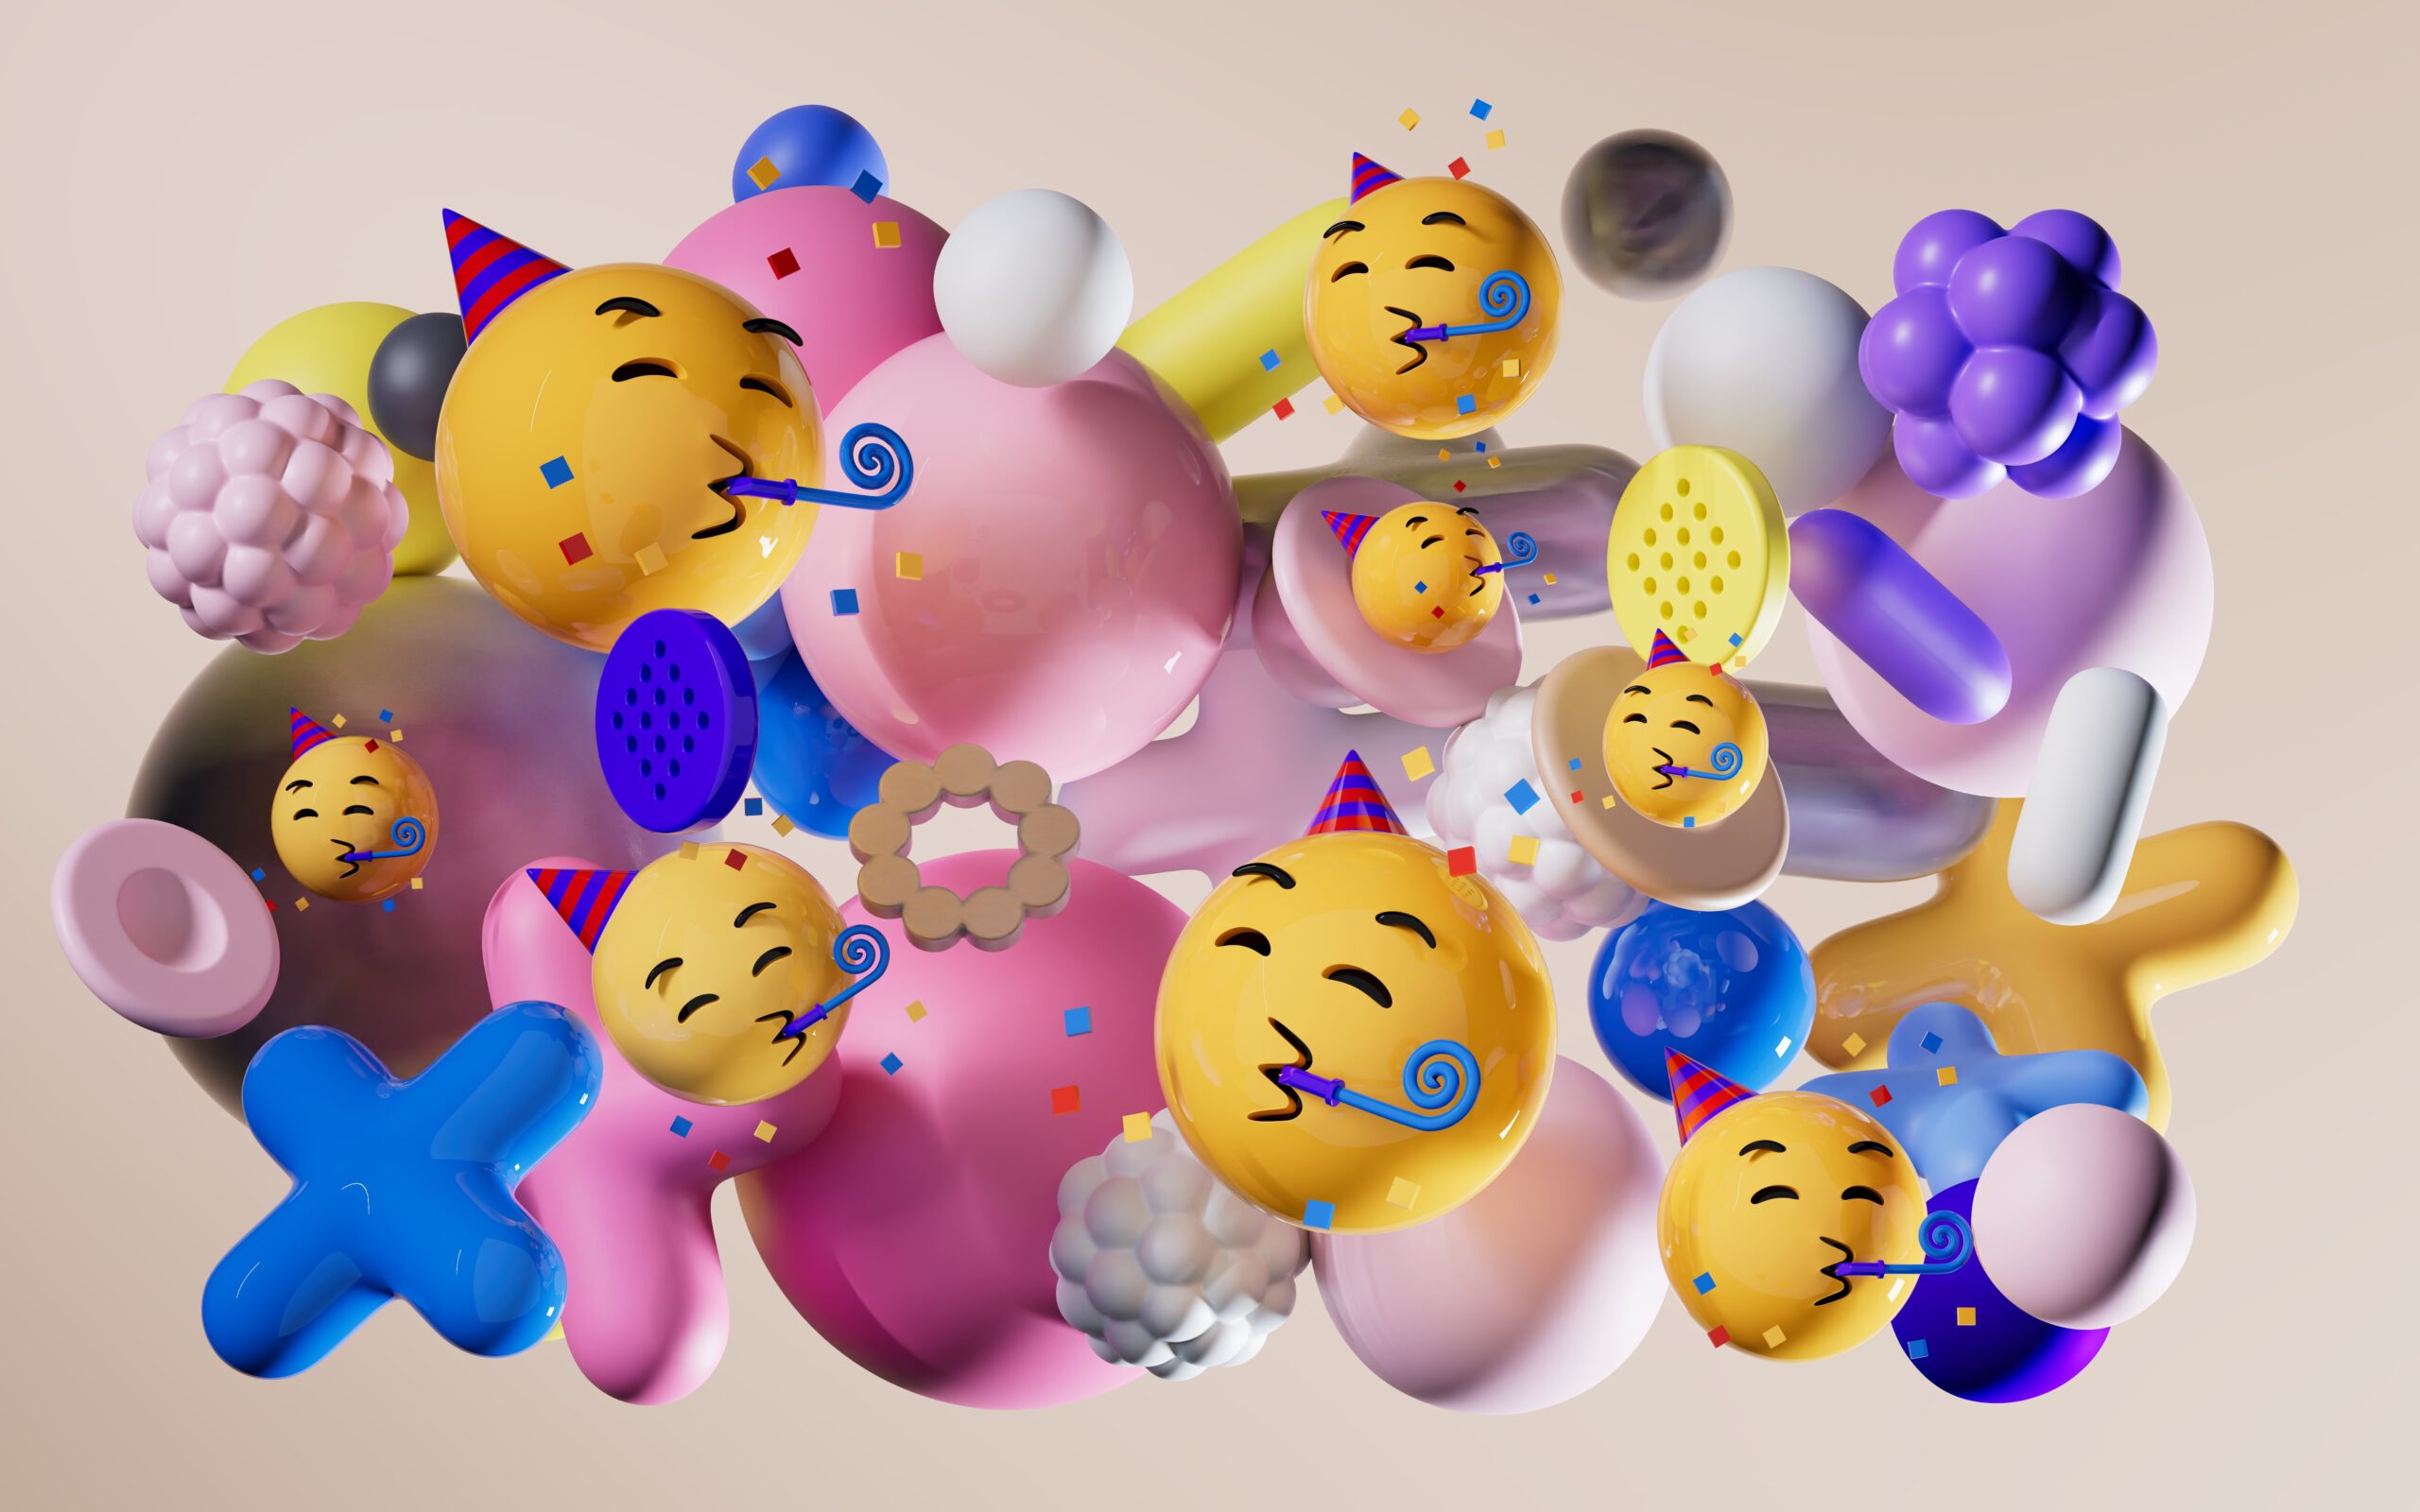 Emojis stylized 3d CGI abstract illustrations object